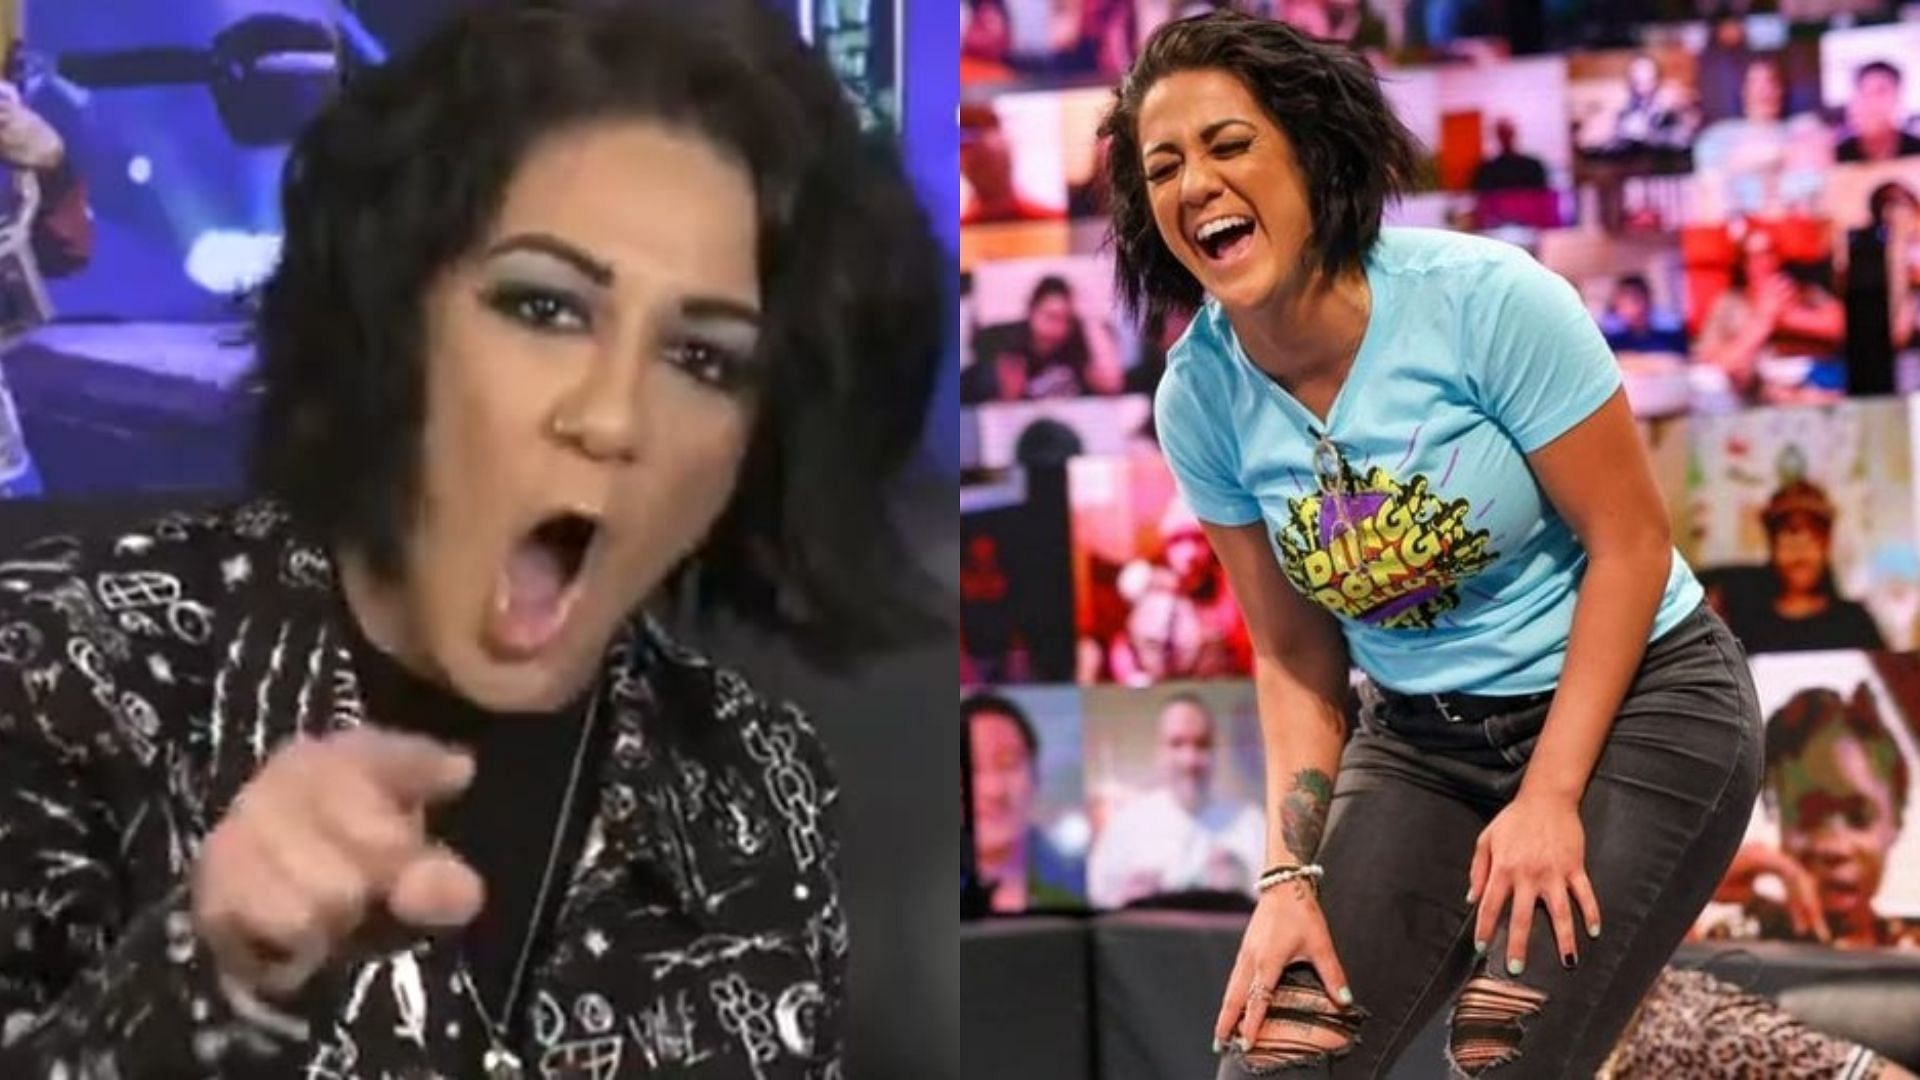 A WWE star recently cosplayed as Bayley 